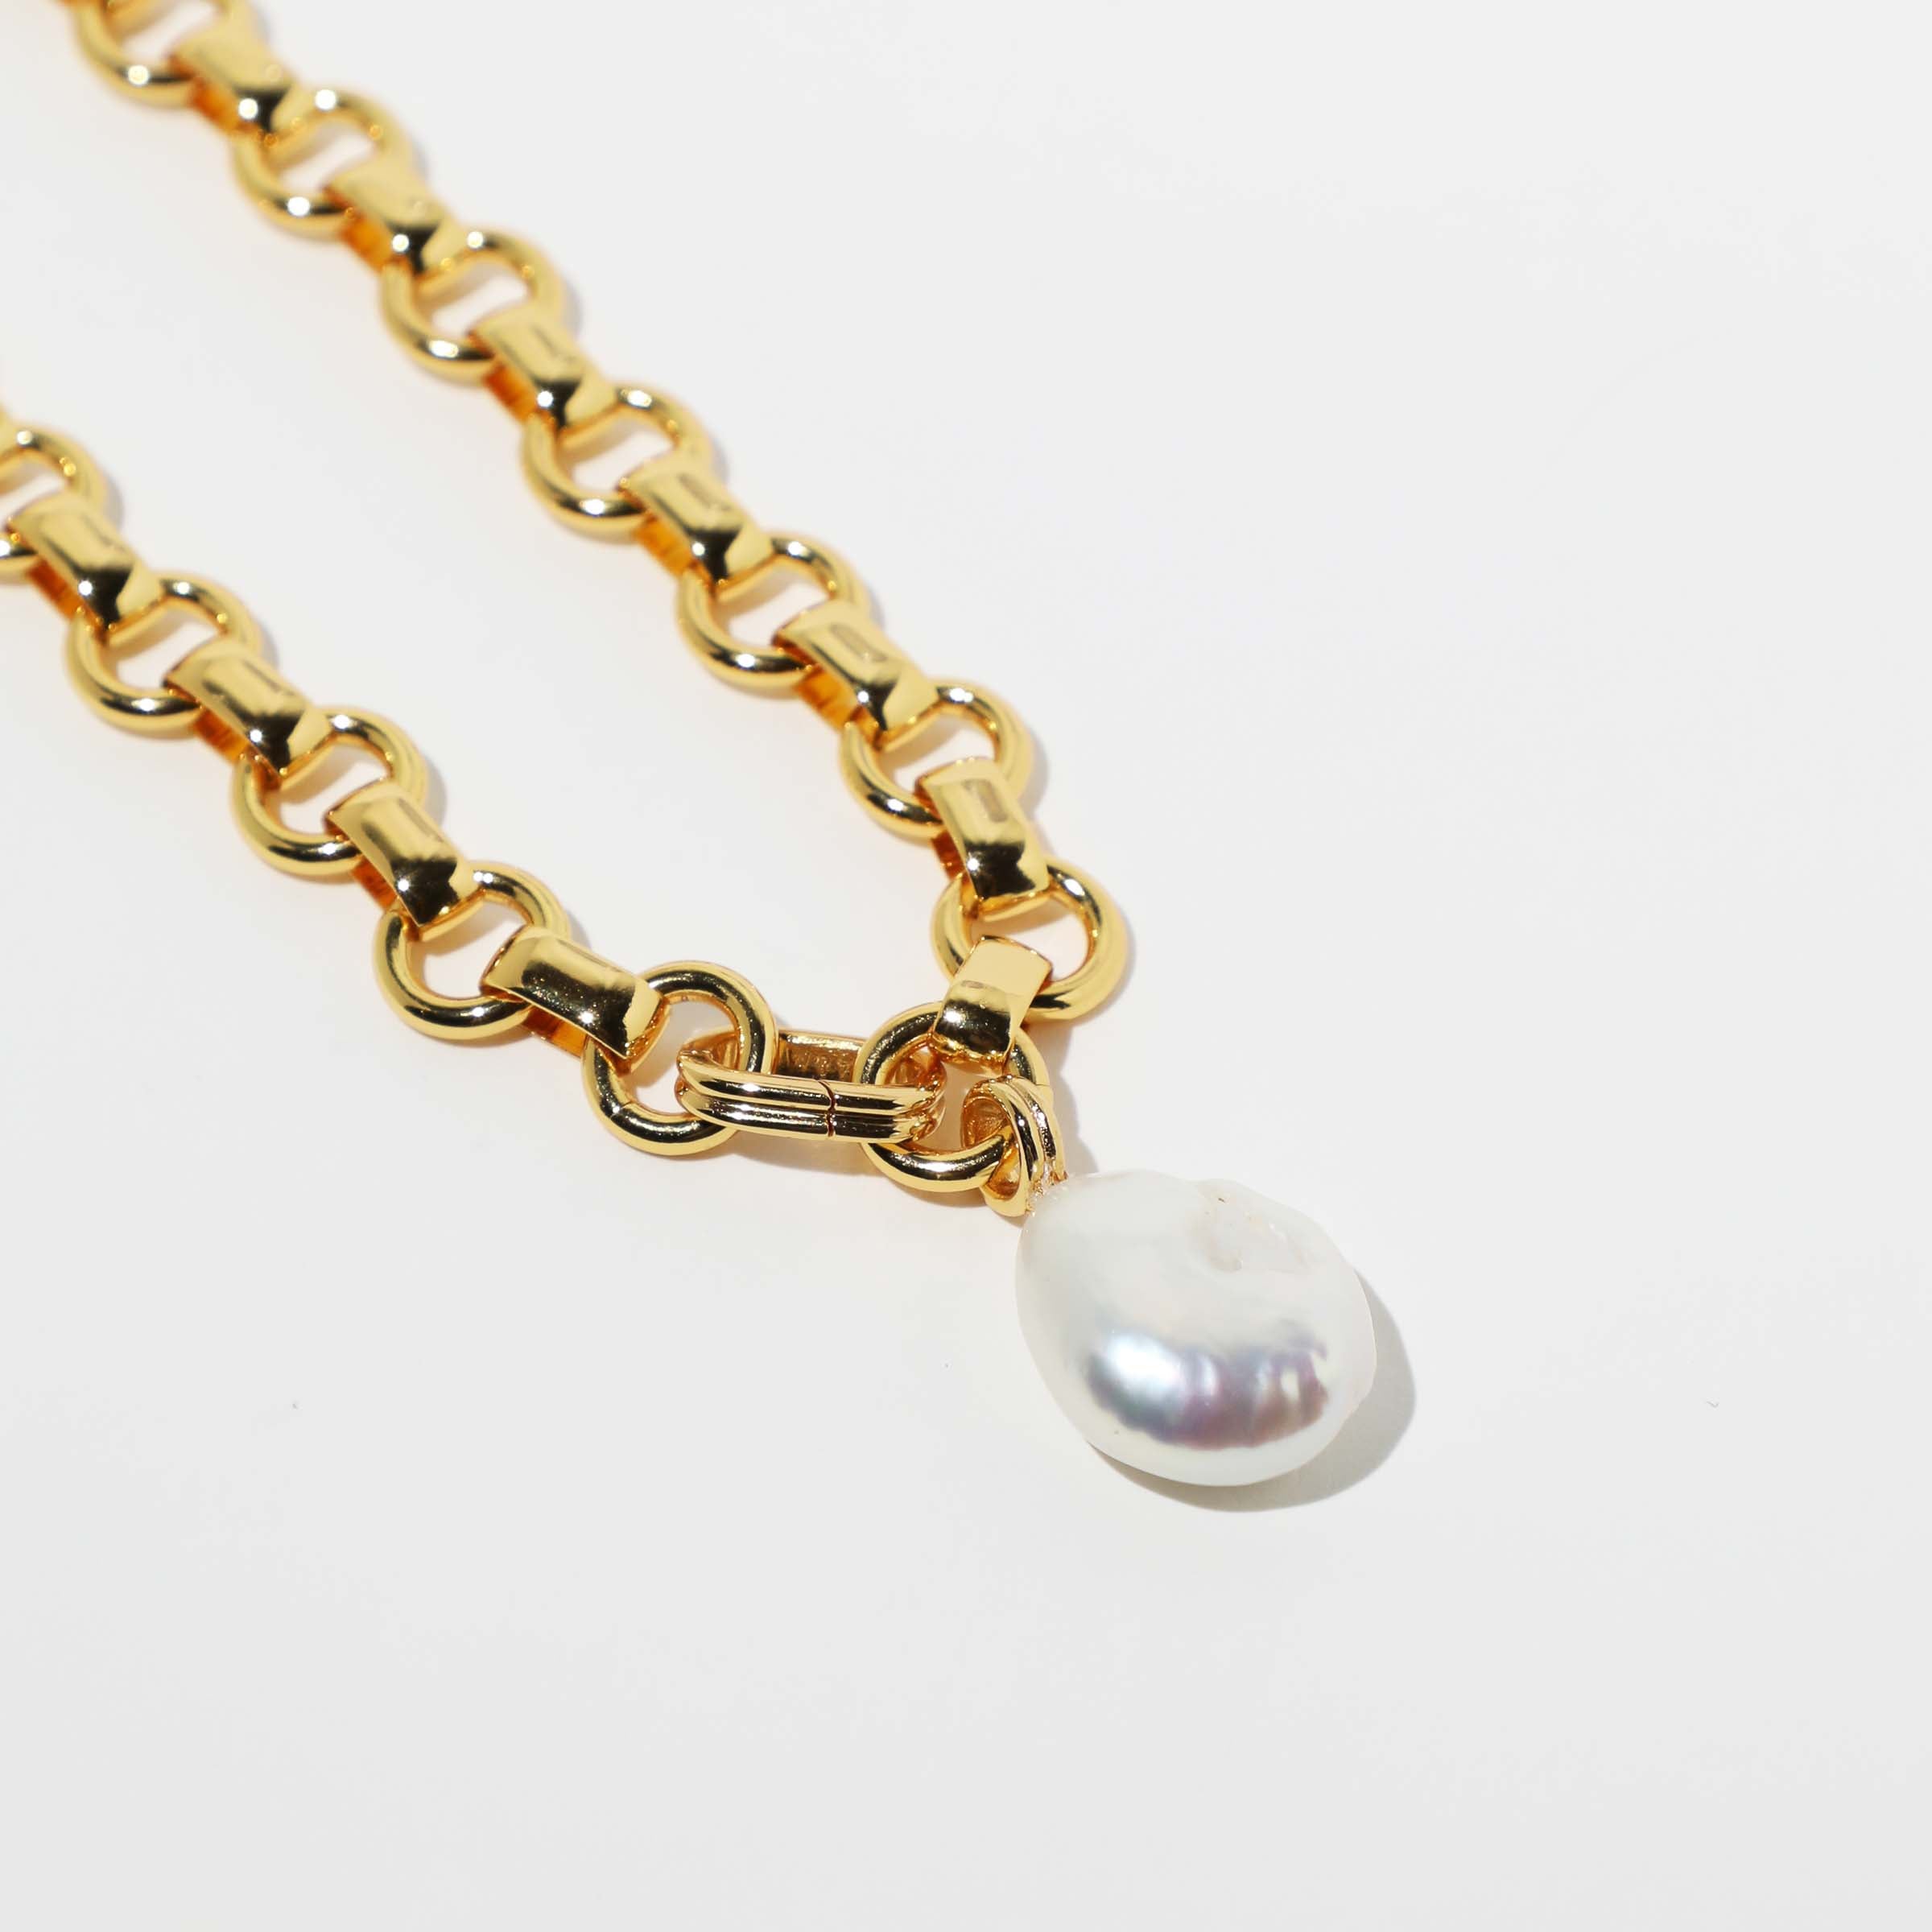 Serenity Pearl Link Chain Necklace in Gold flat lay